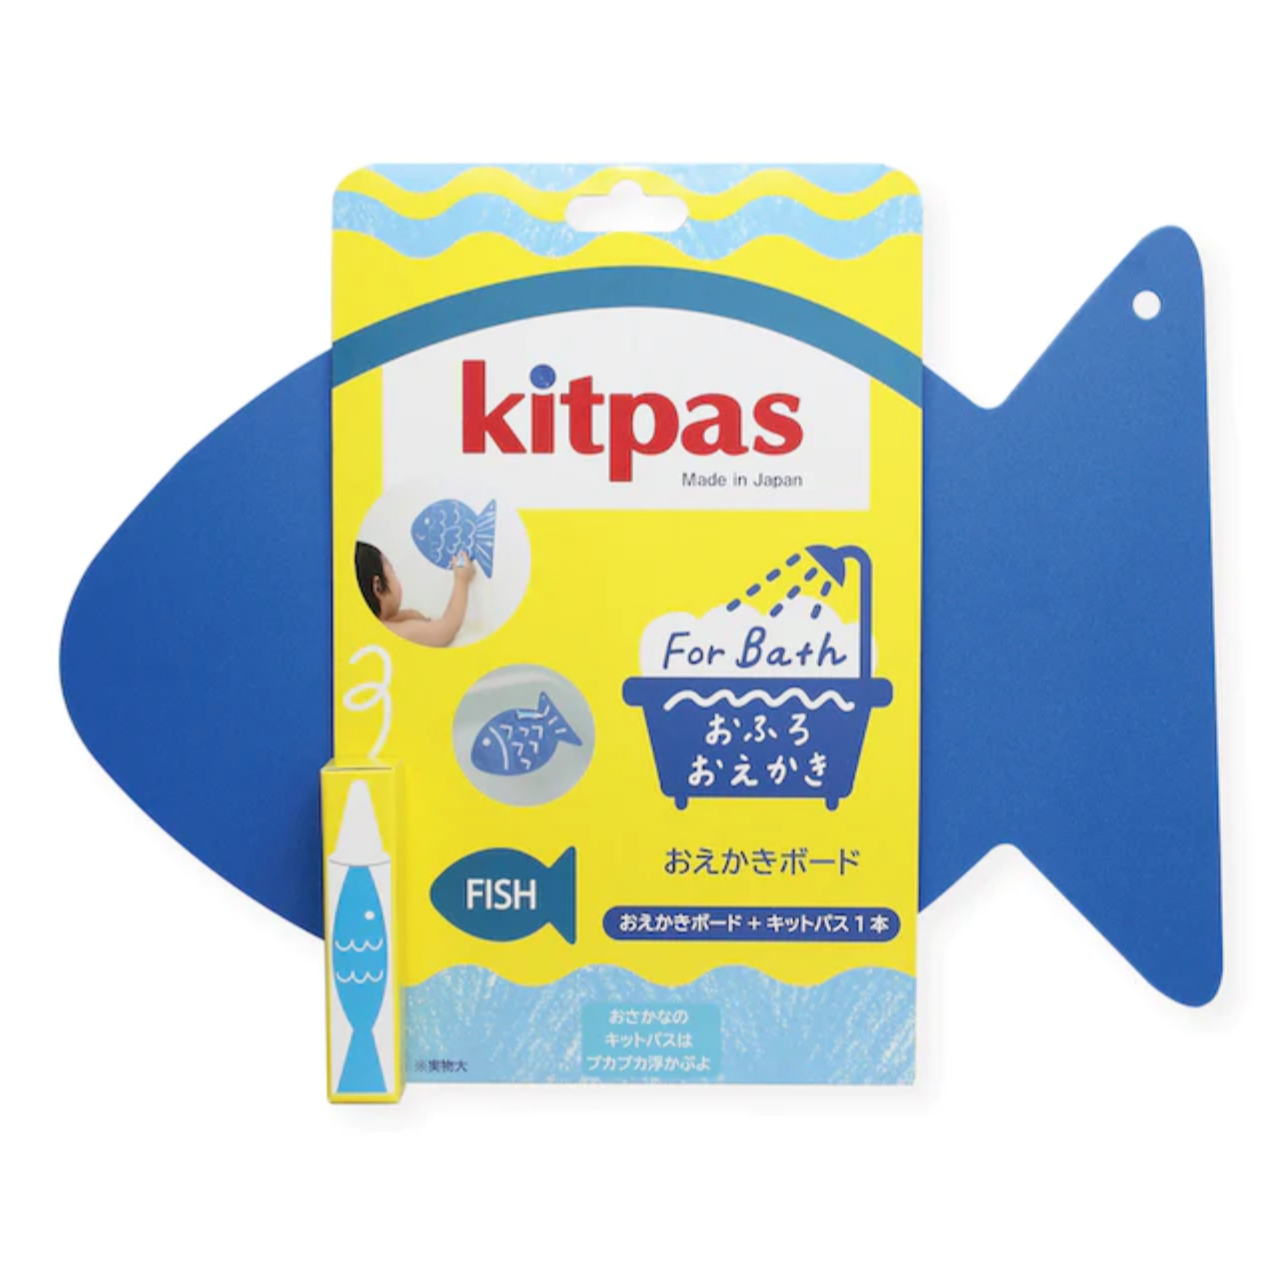 Kitpas for Bath (Drawing board set) with Fish board